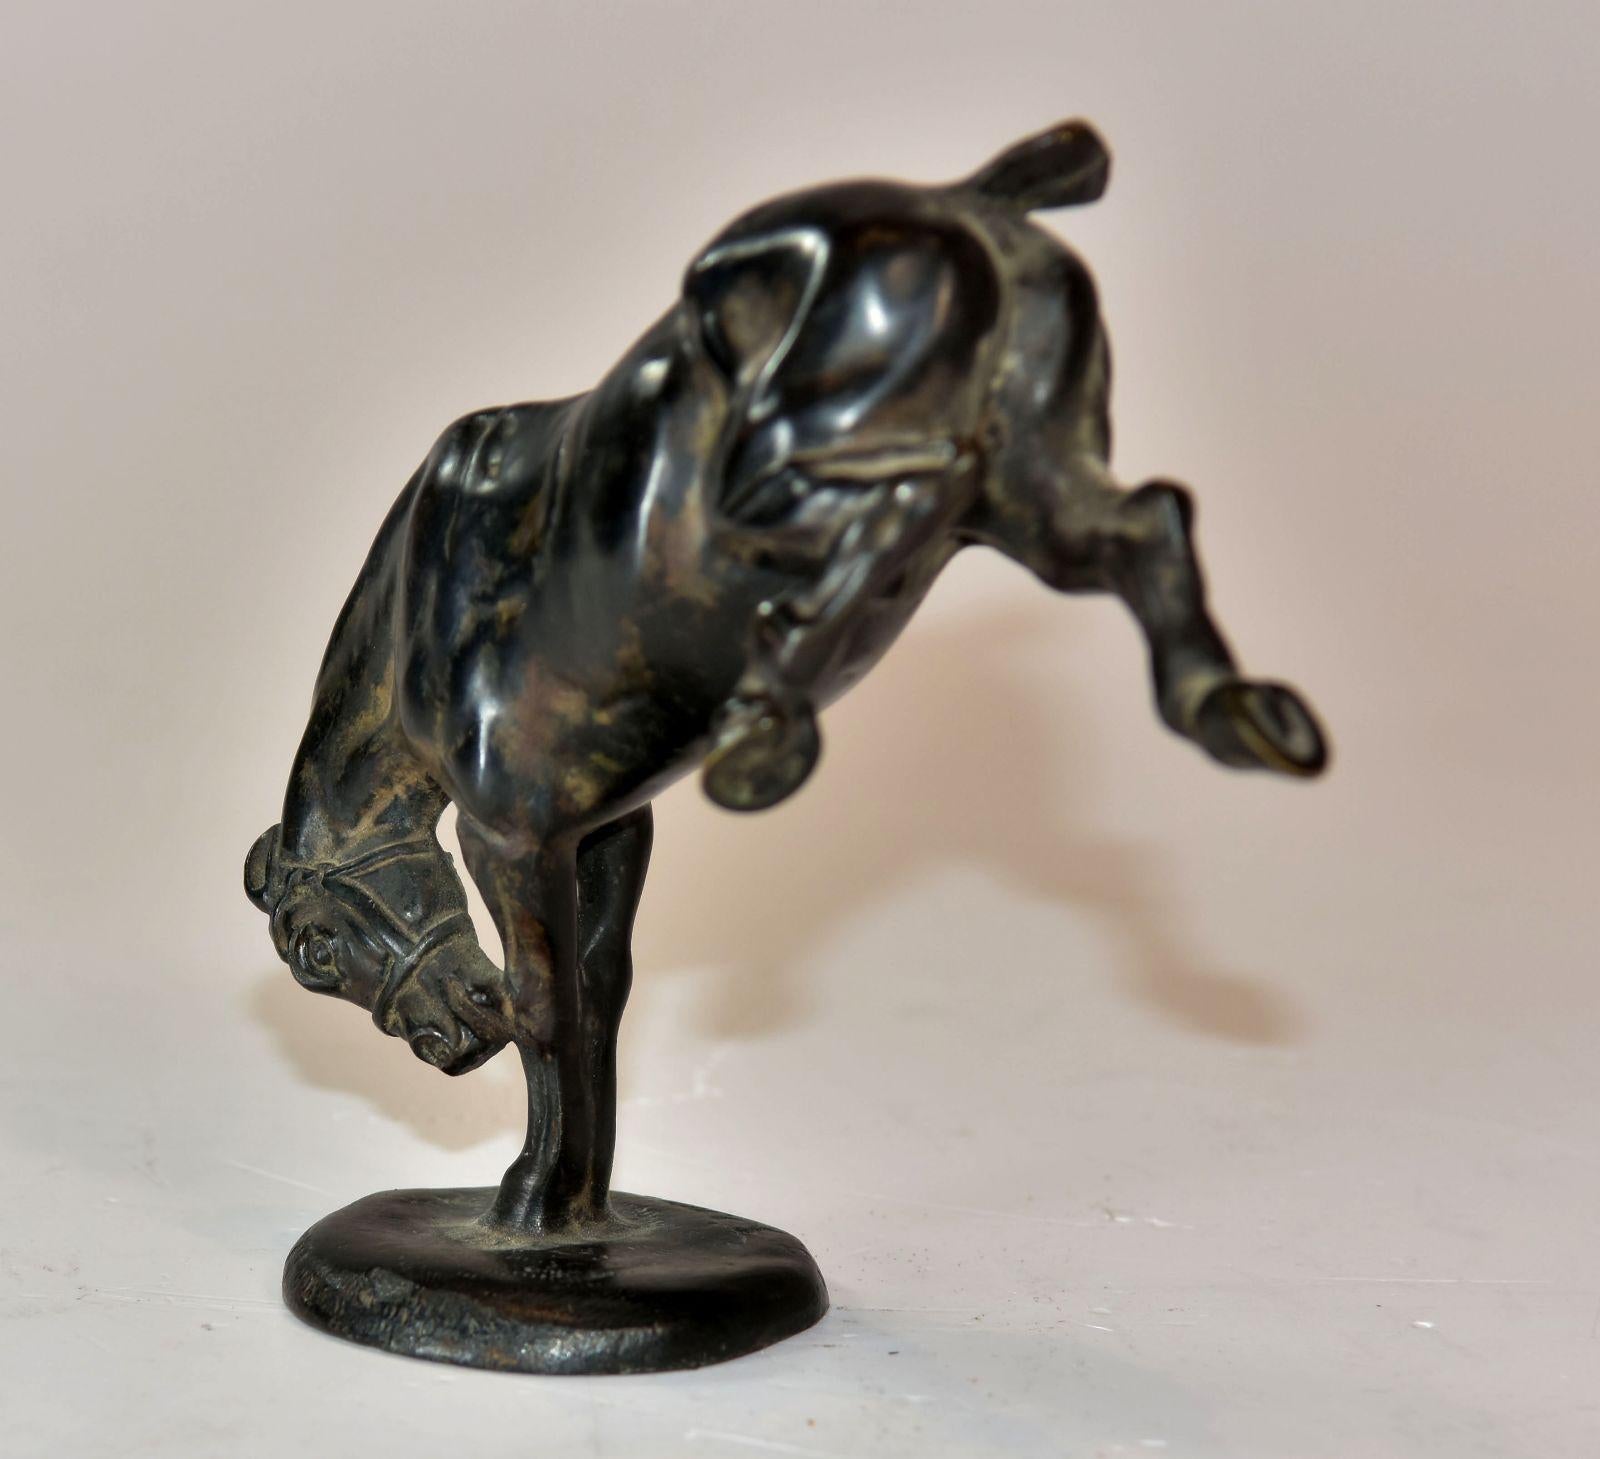 Early 20th century bronze animal riding horse by Gaston d'Ilers.